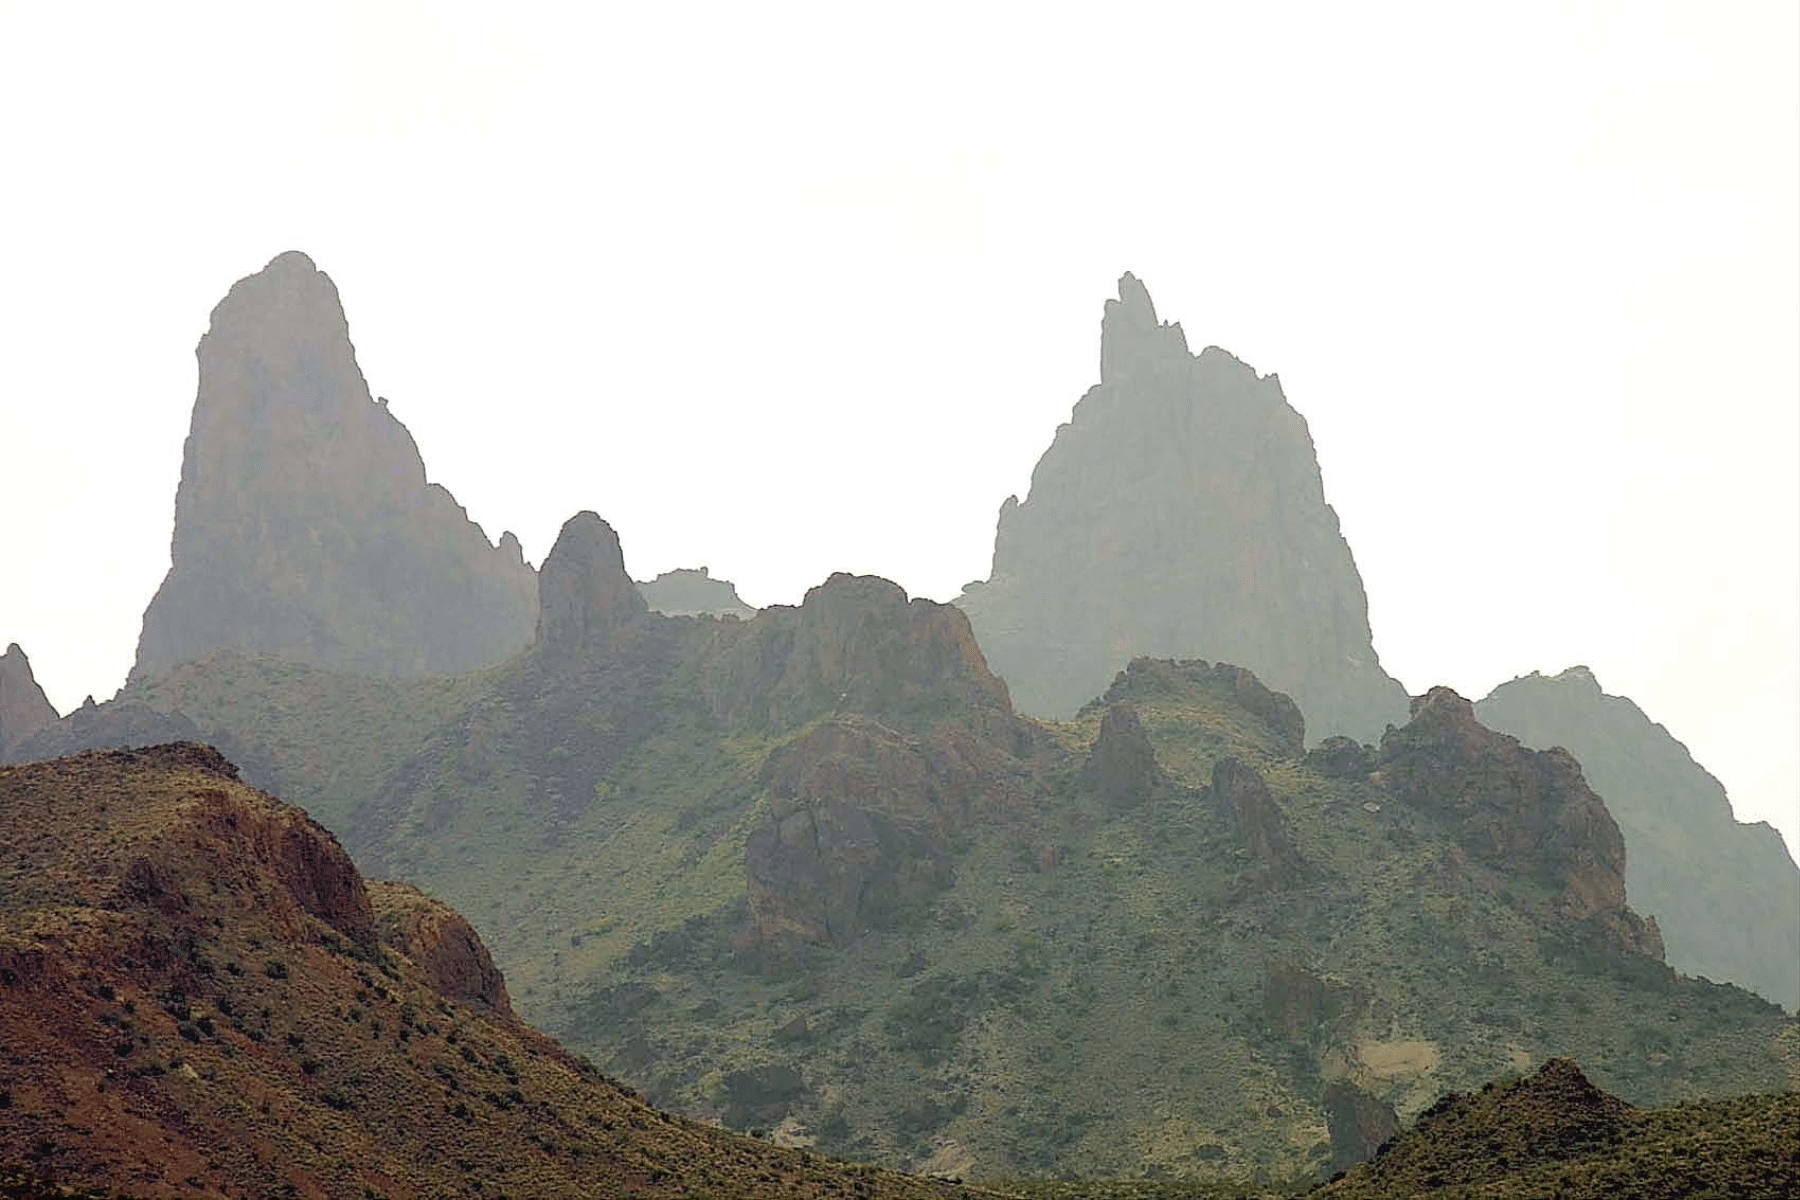 Jagged mountains in the foreground and background form the shape of Mules Ears in the distance.